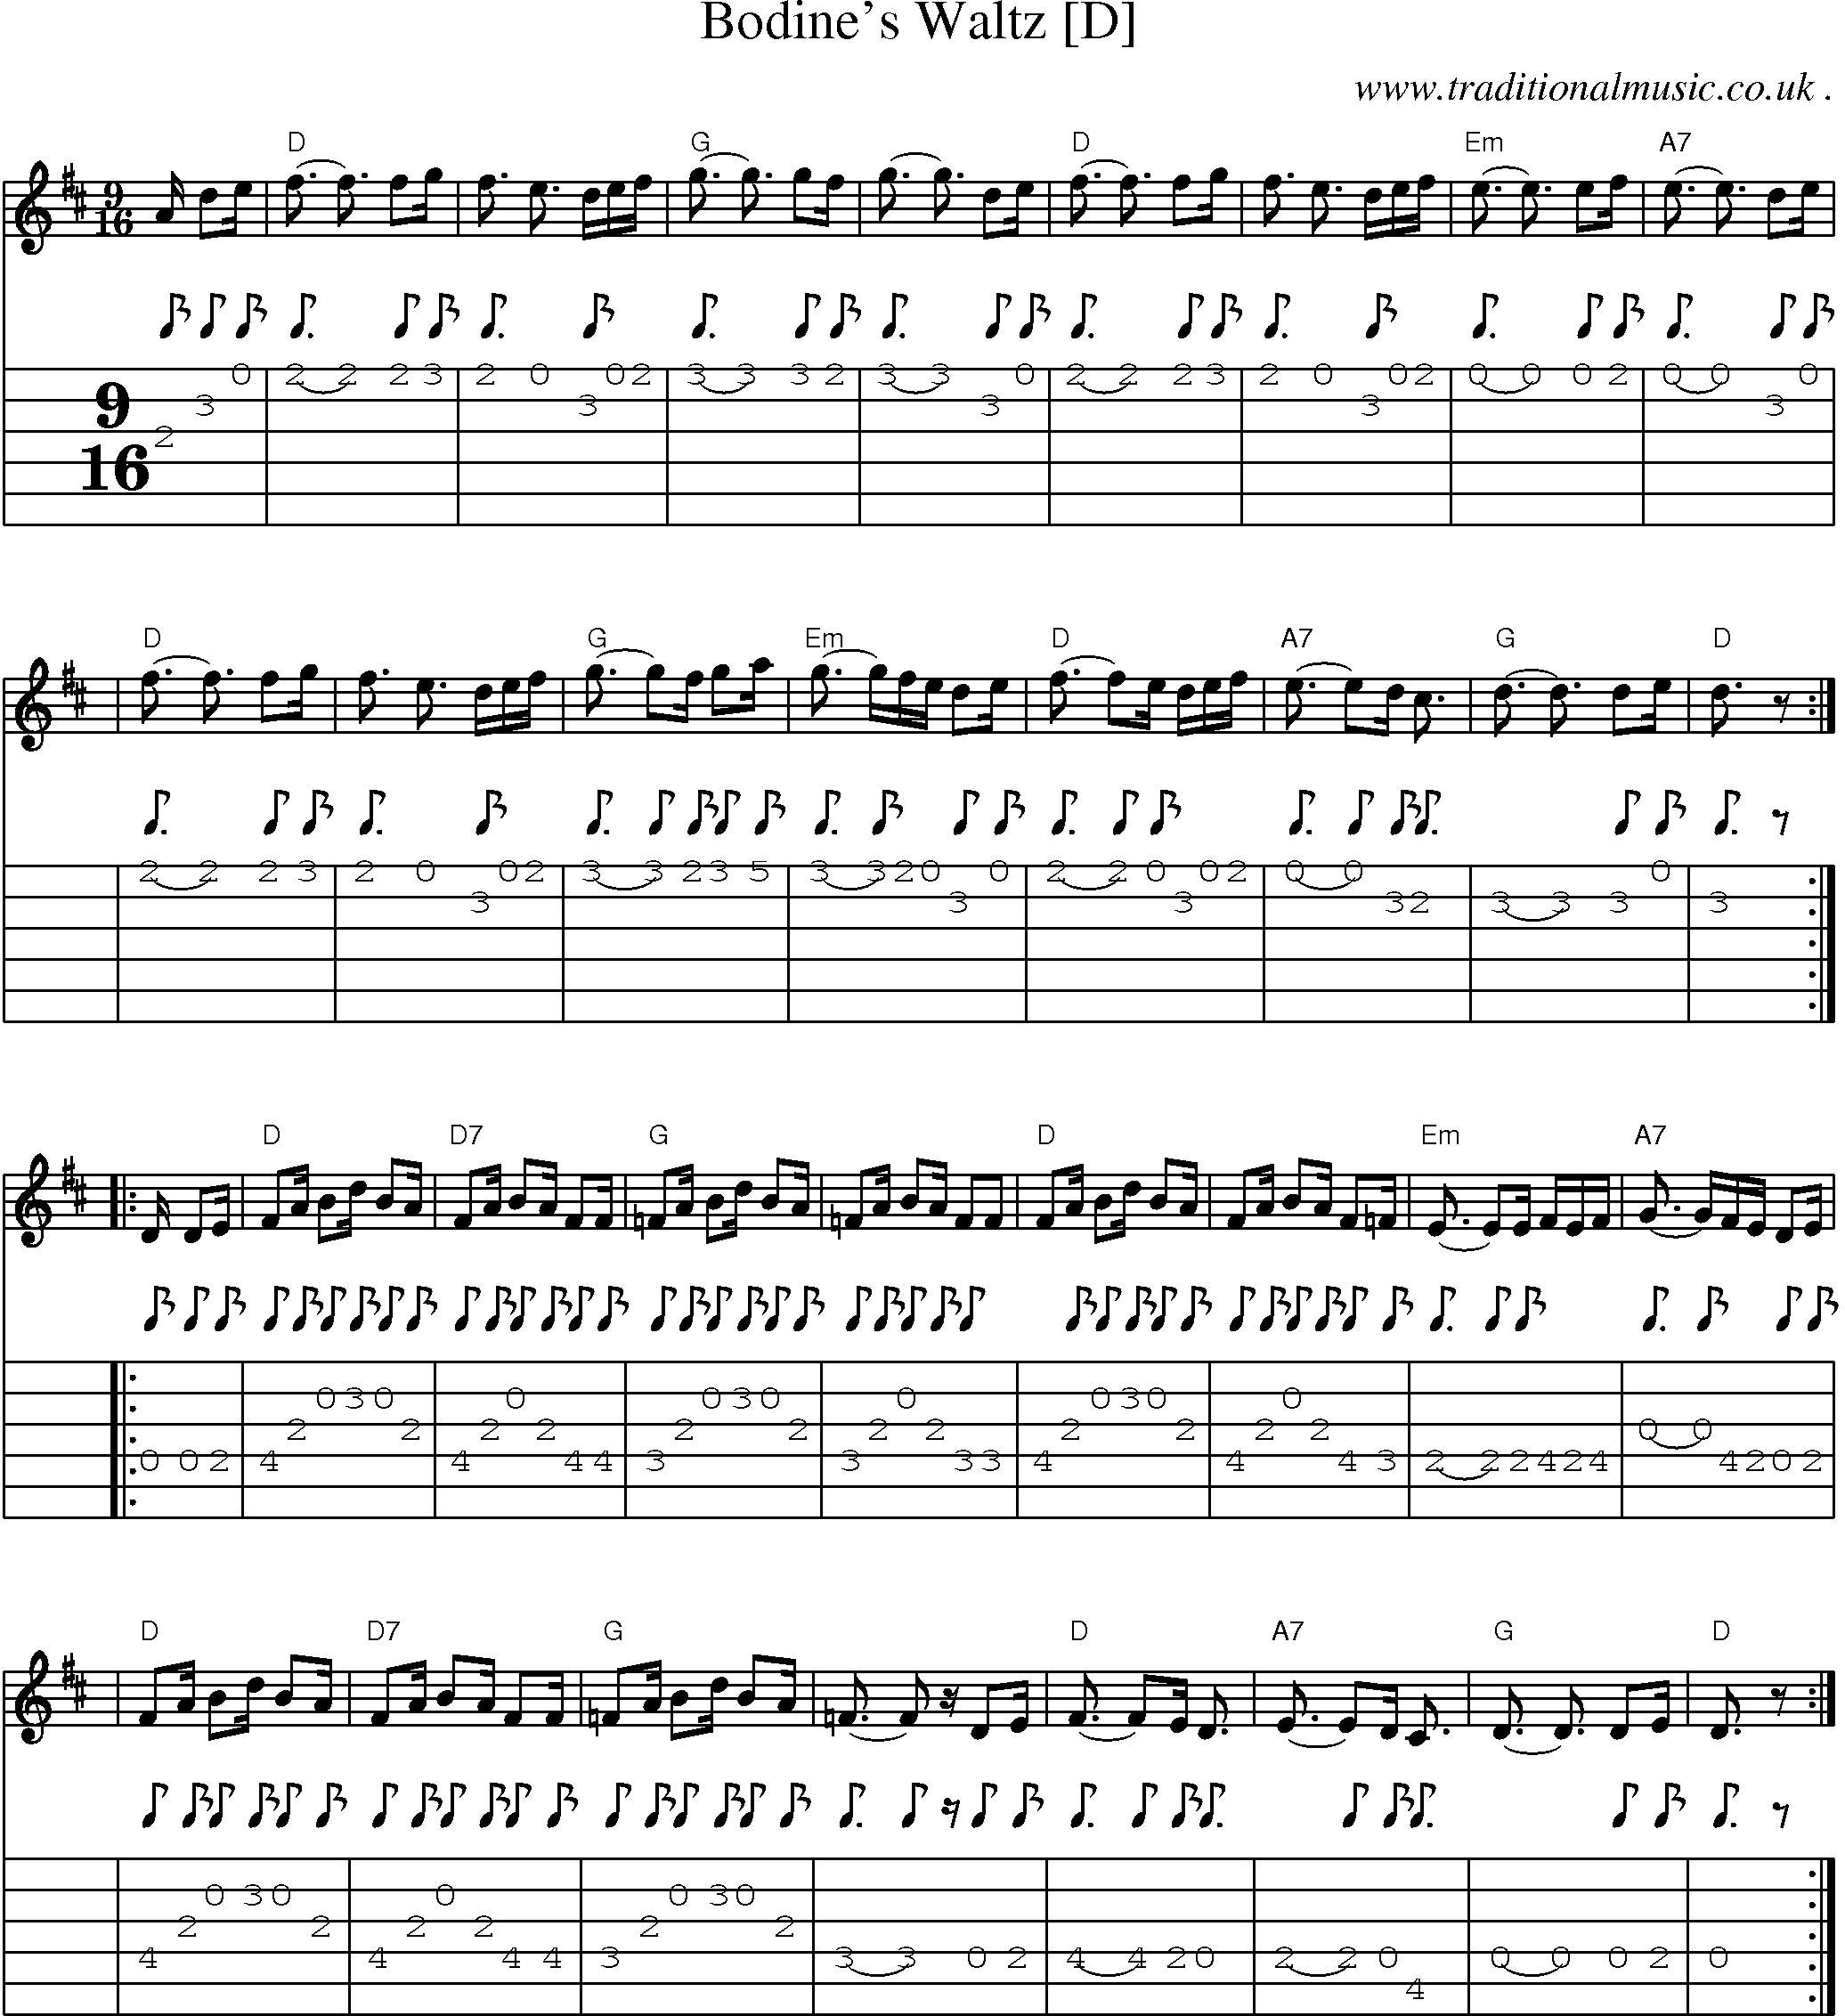 Music Score and Guitar Tabs for Bodines Waltz [d]